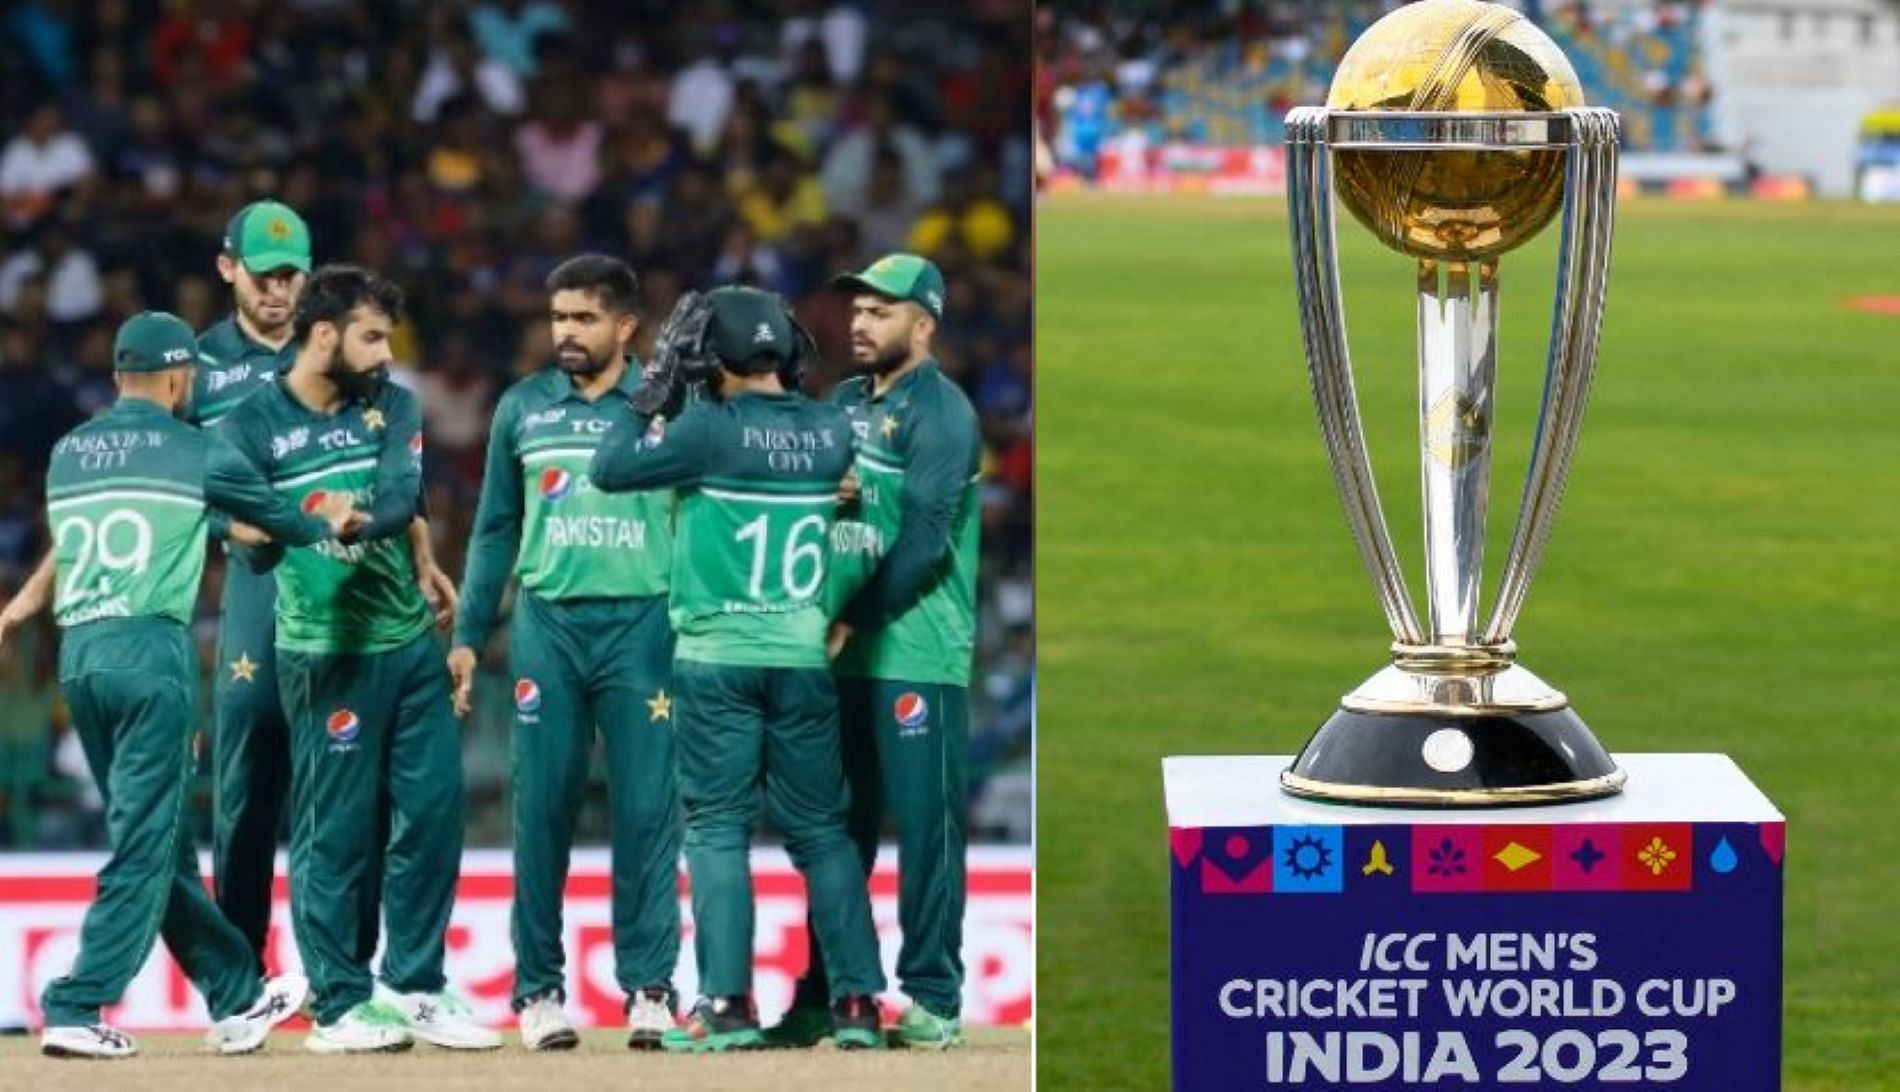 Pakistan will look to rebound from a dismal Asia Cup showing